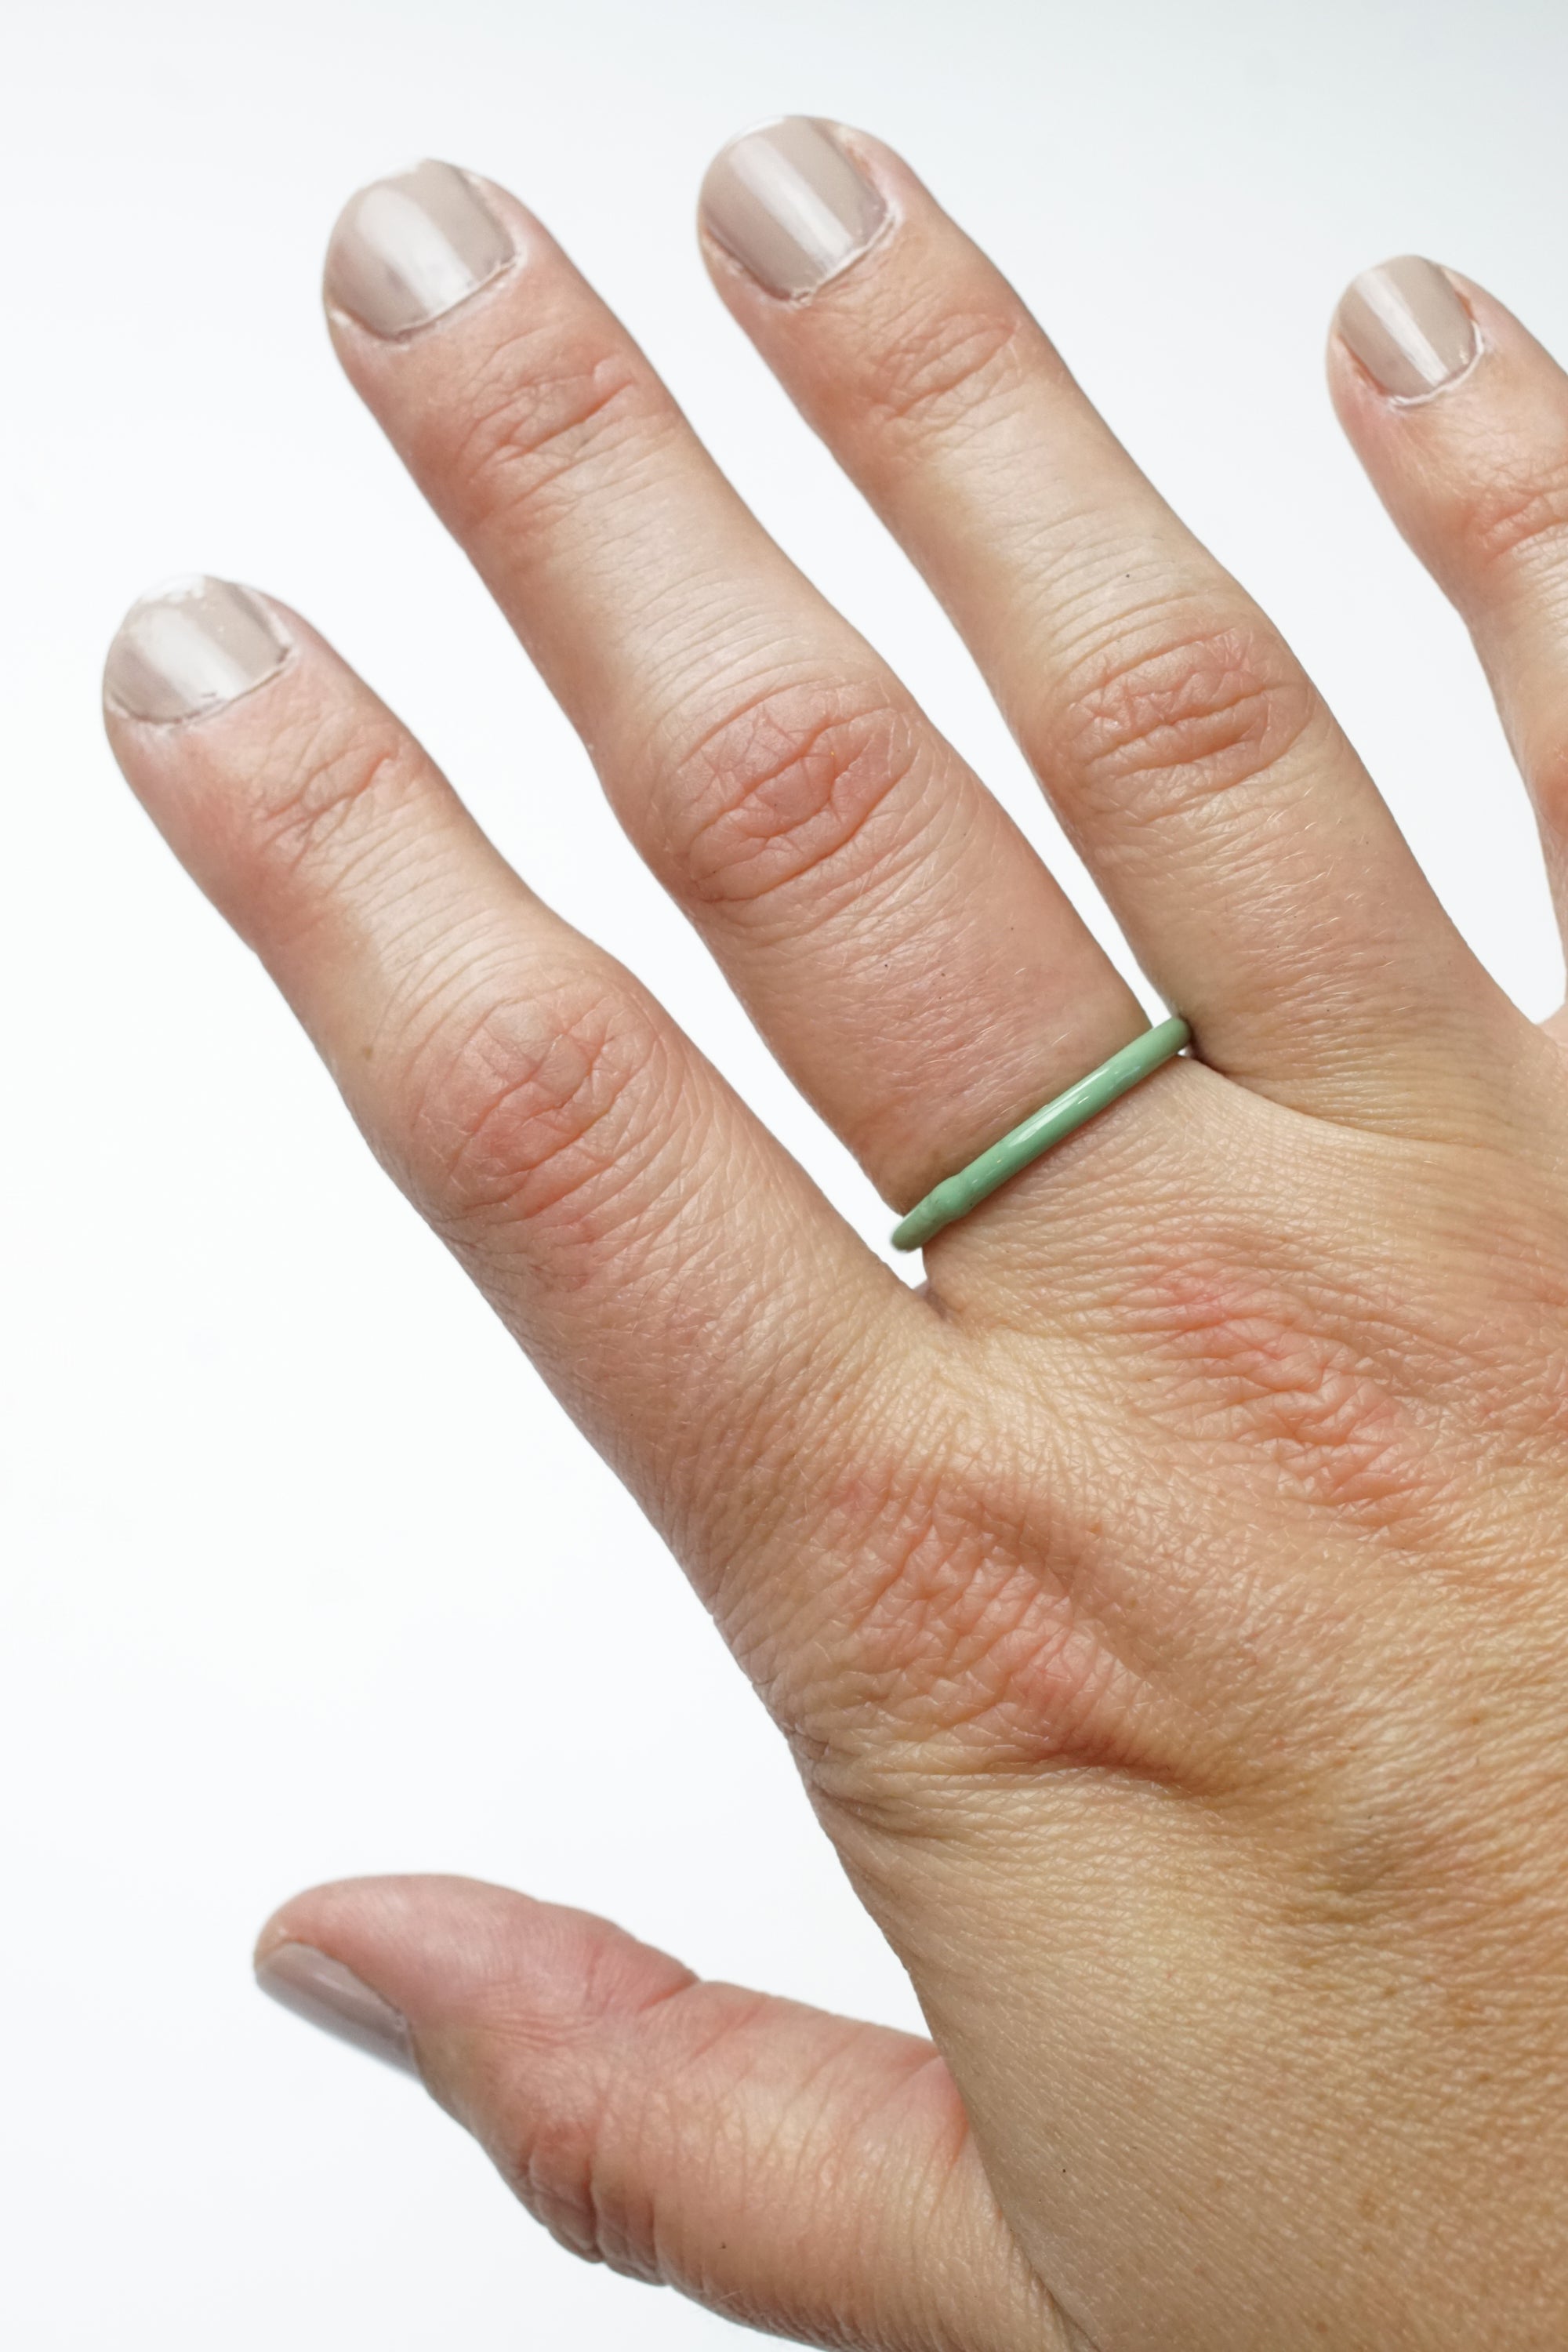 Stacking Ring in Pale Green